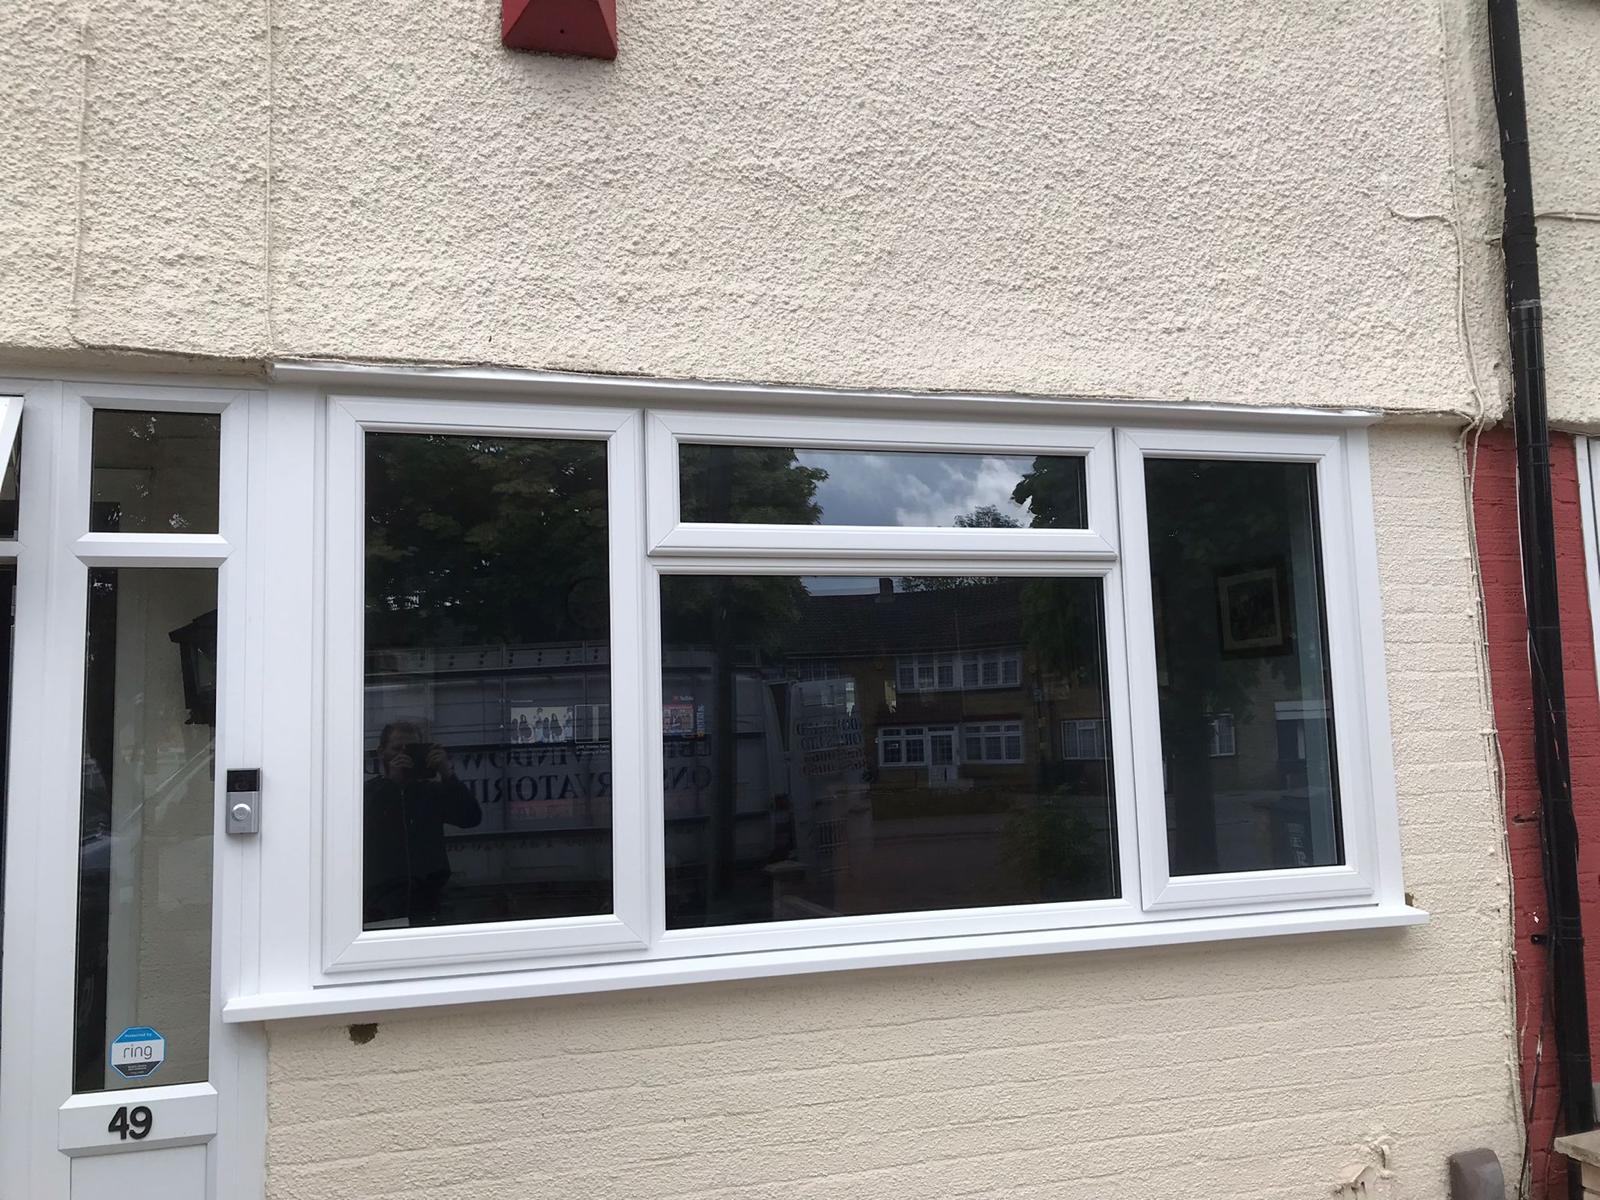 UPVC Windows With Opening And Fixed Panes